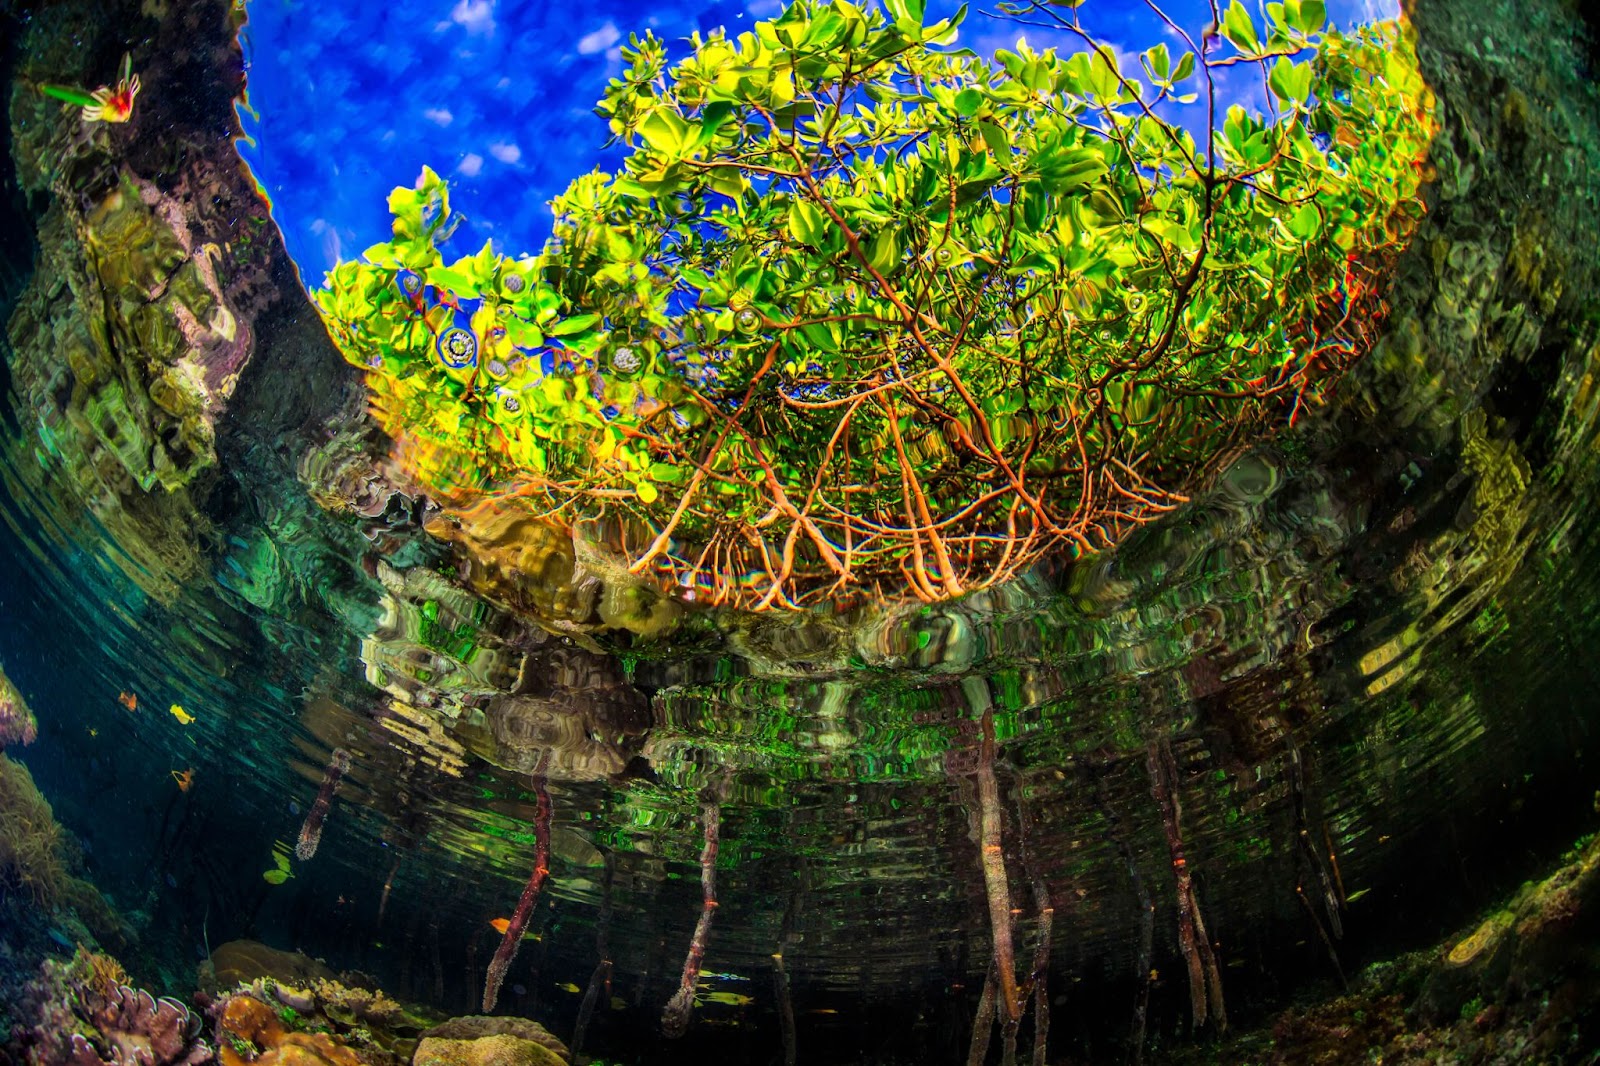 A view of mangroves from beneath the water. Brown roots lead up to bright green leaves, silhouetted against a bright blue sky, rooted in a rippled green water.